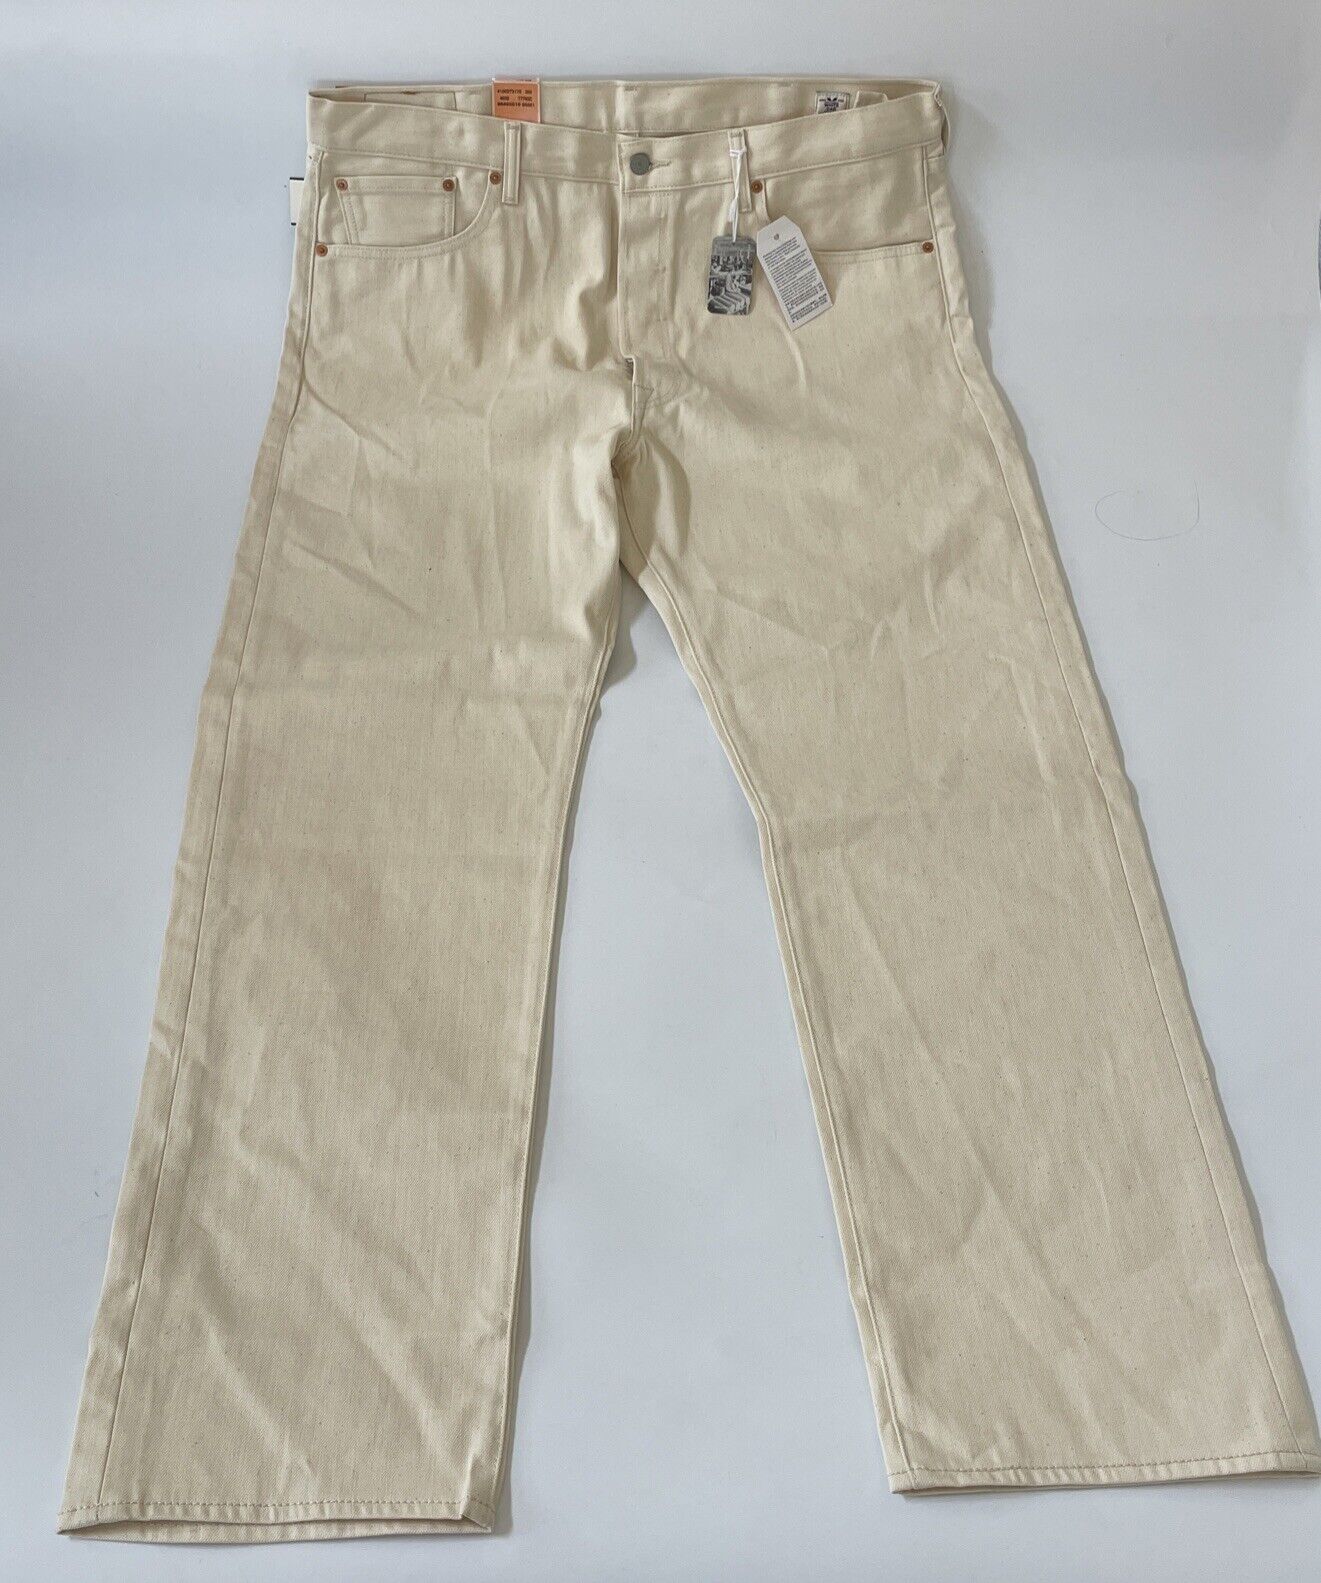 LEVIS 501 WHITE OAK Jeans Cone Denim Off White 40 X 32 NEW Button Fly Shrink Fit